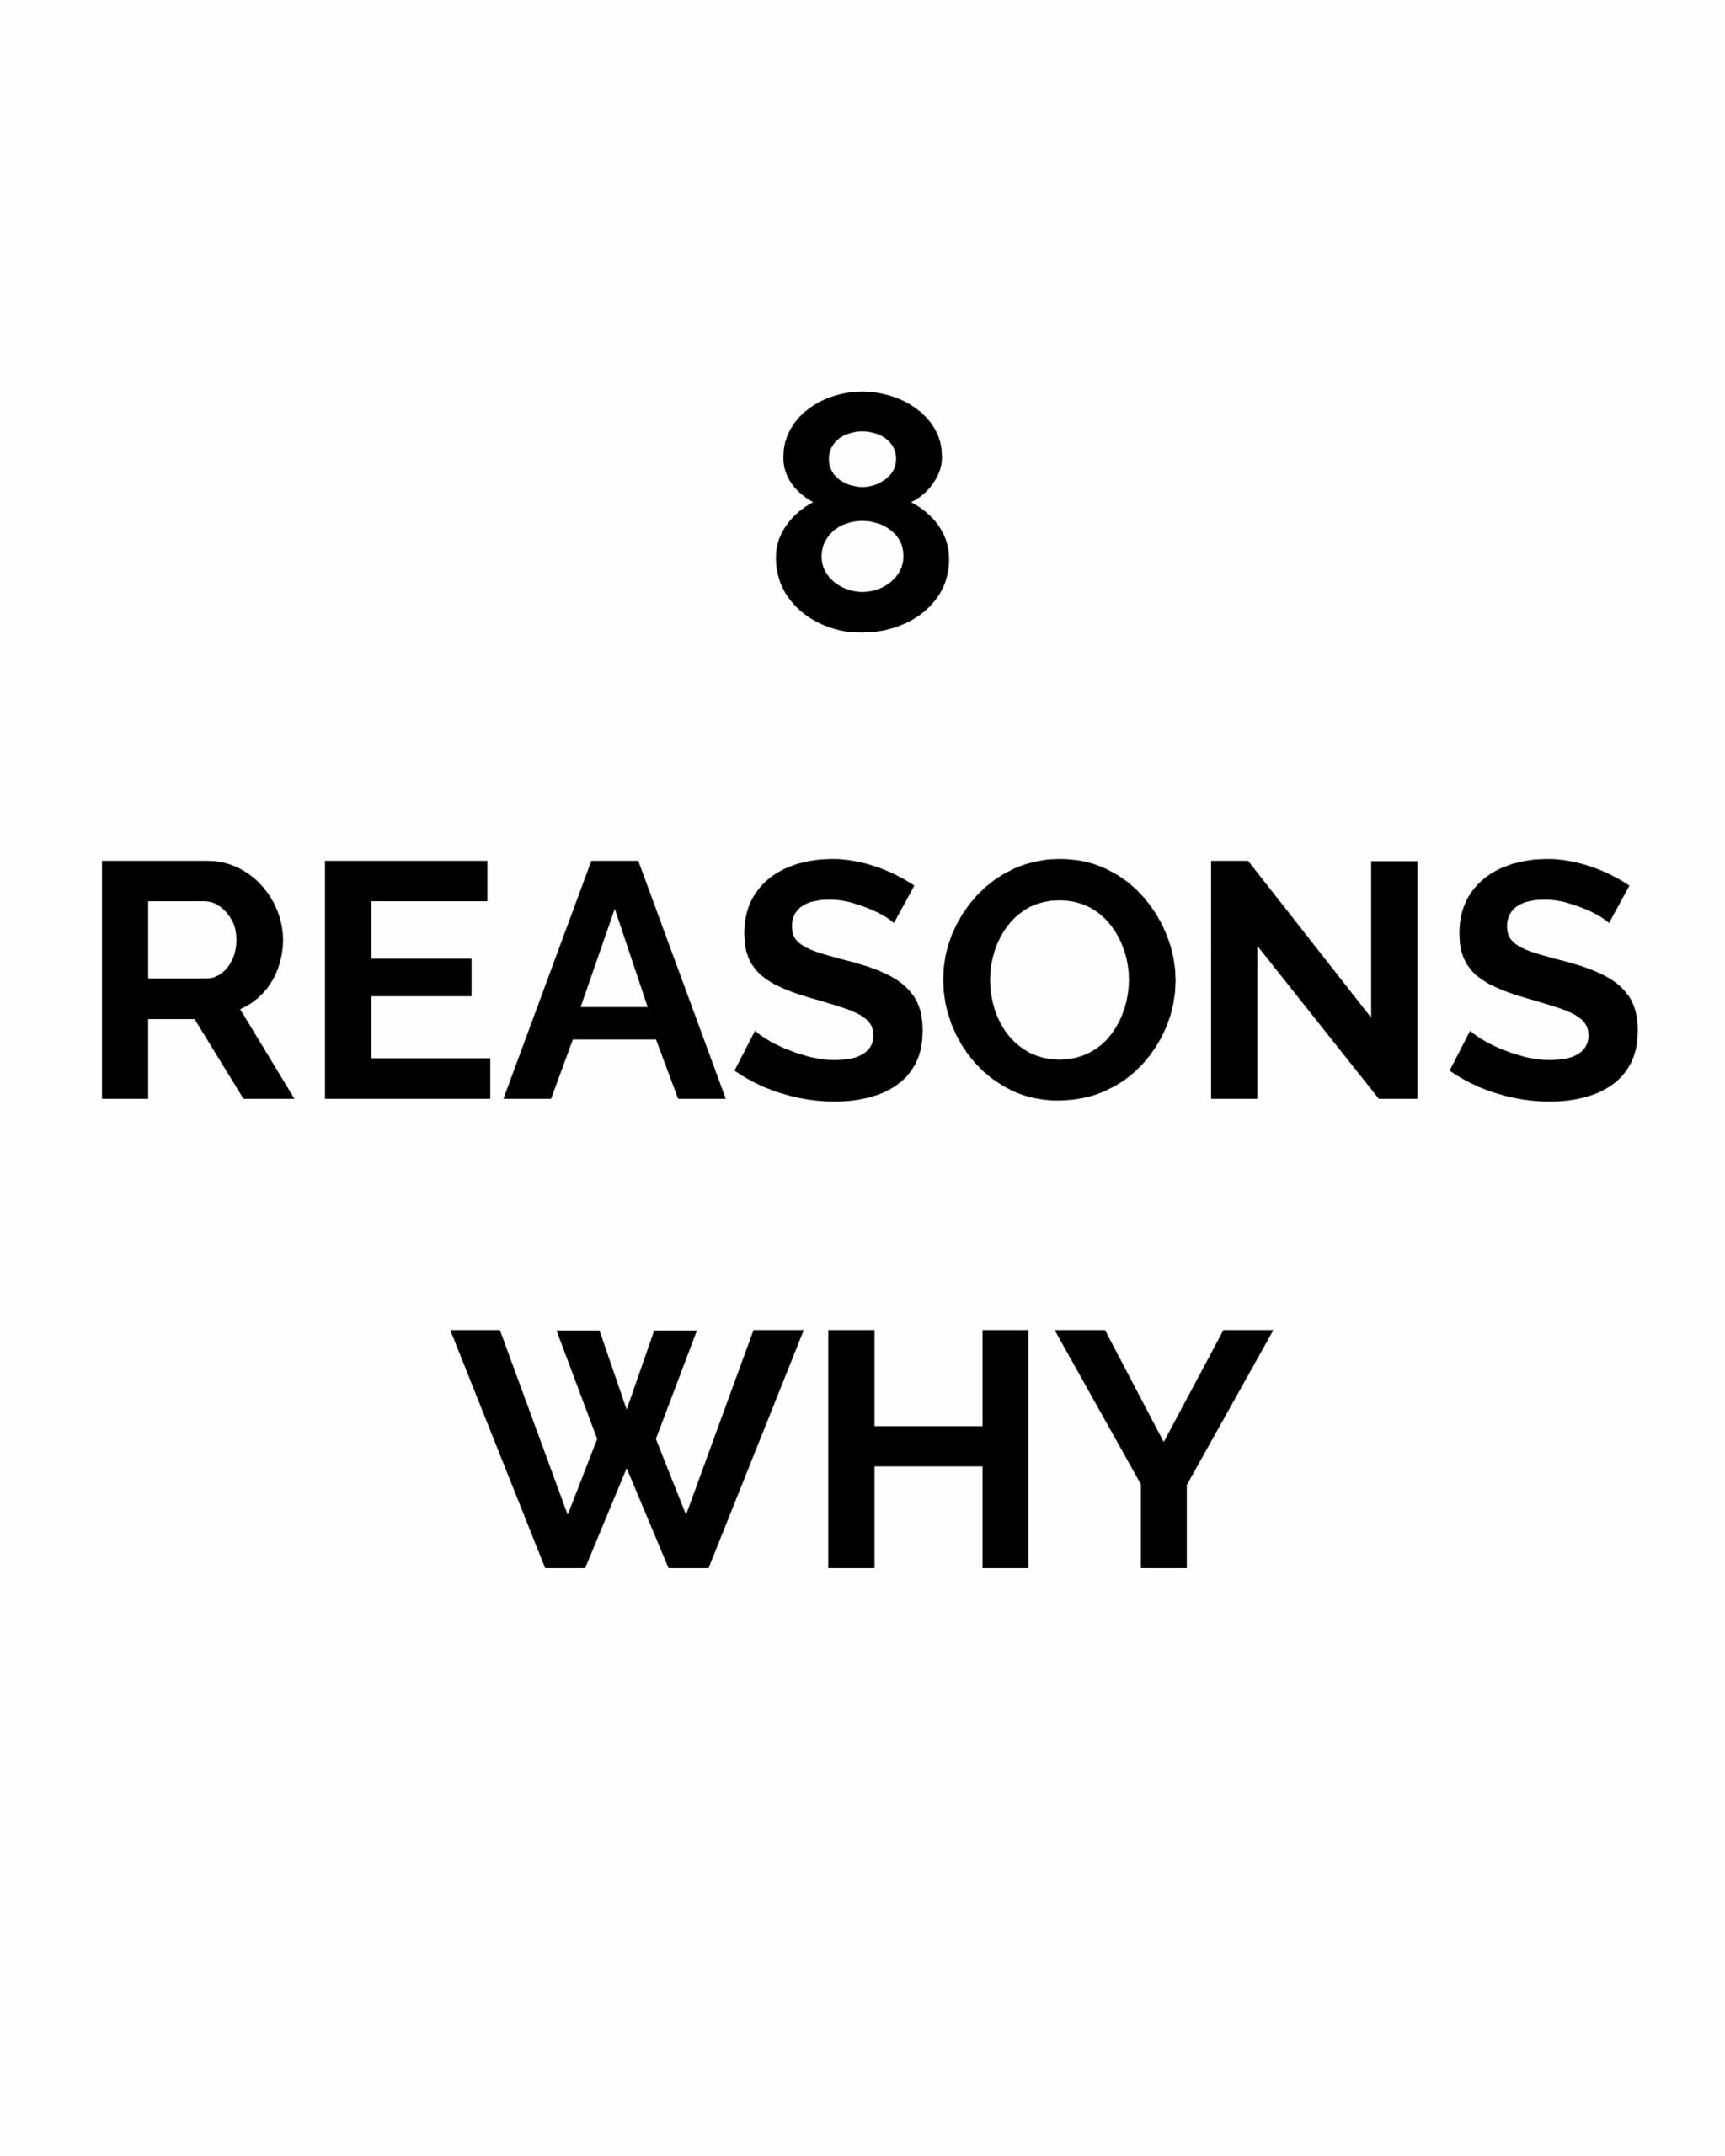 8 Reasons Why You’re More Amazing Than You Think 🌟 Don’t Believe Me? Read the Comments and Find Out Why!